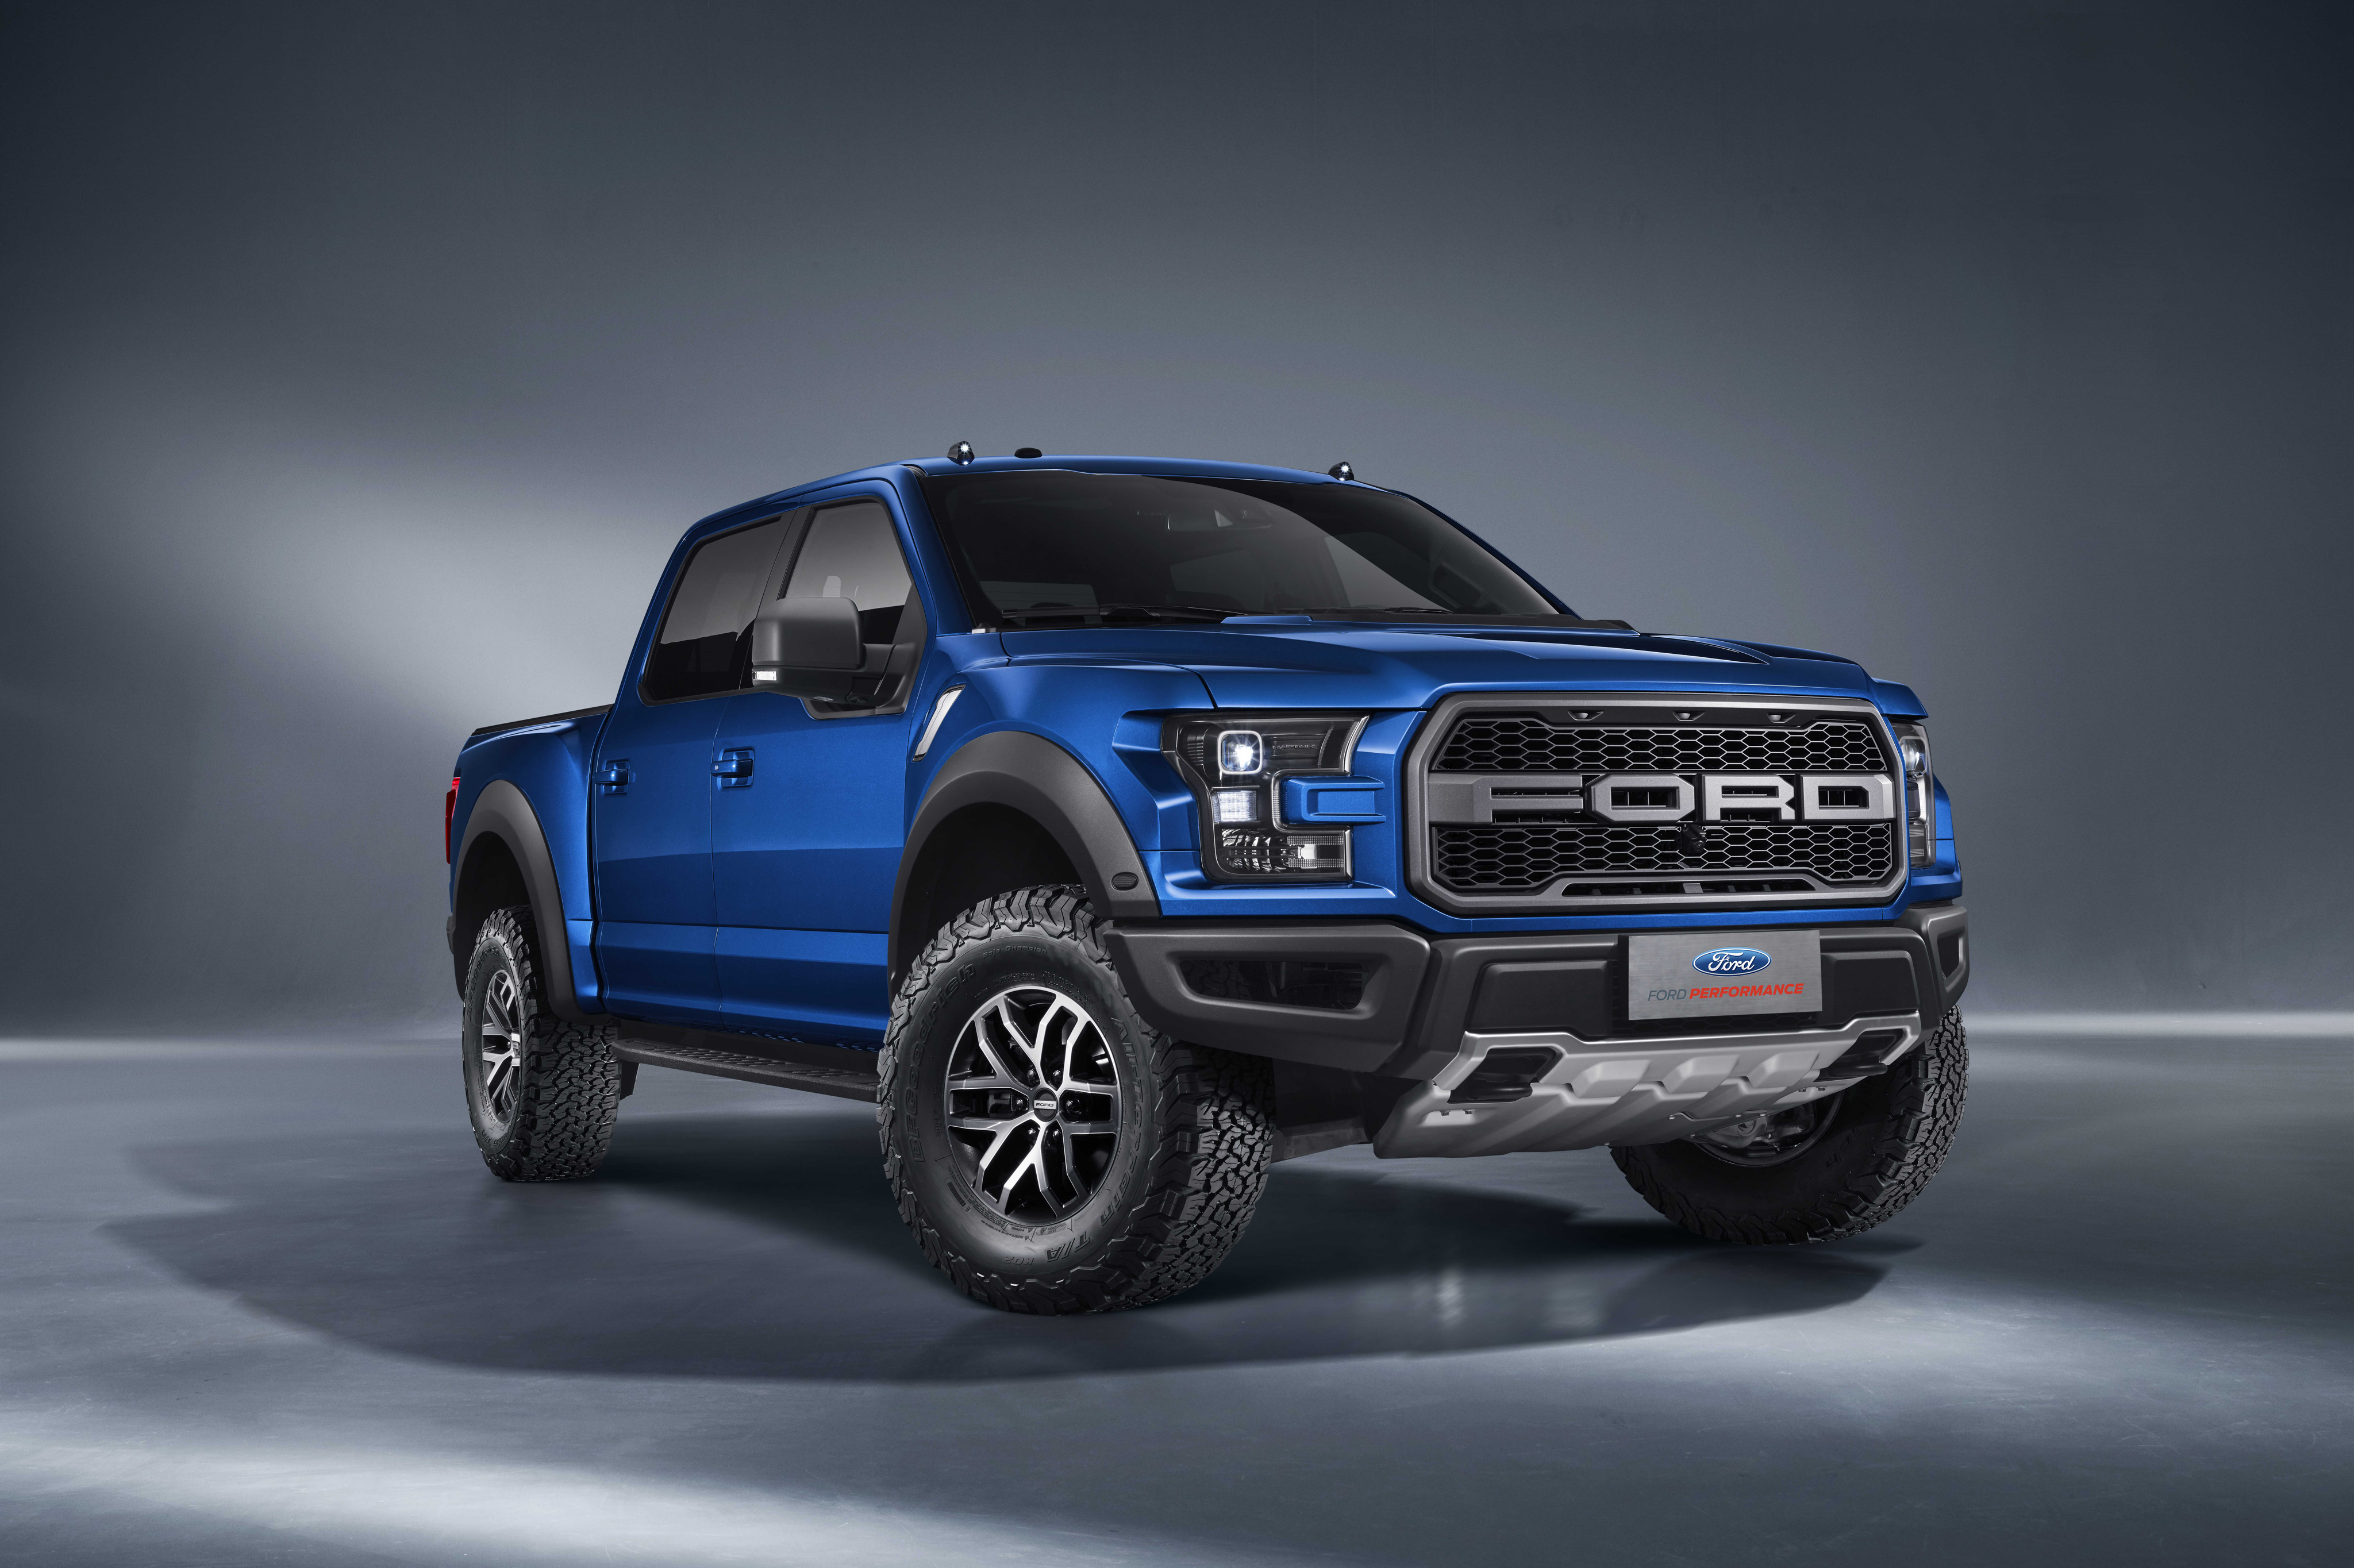 Ford F-150 Wallpapers